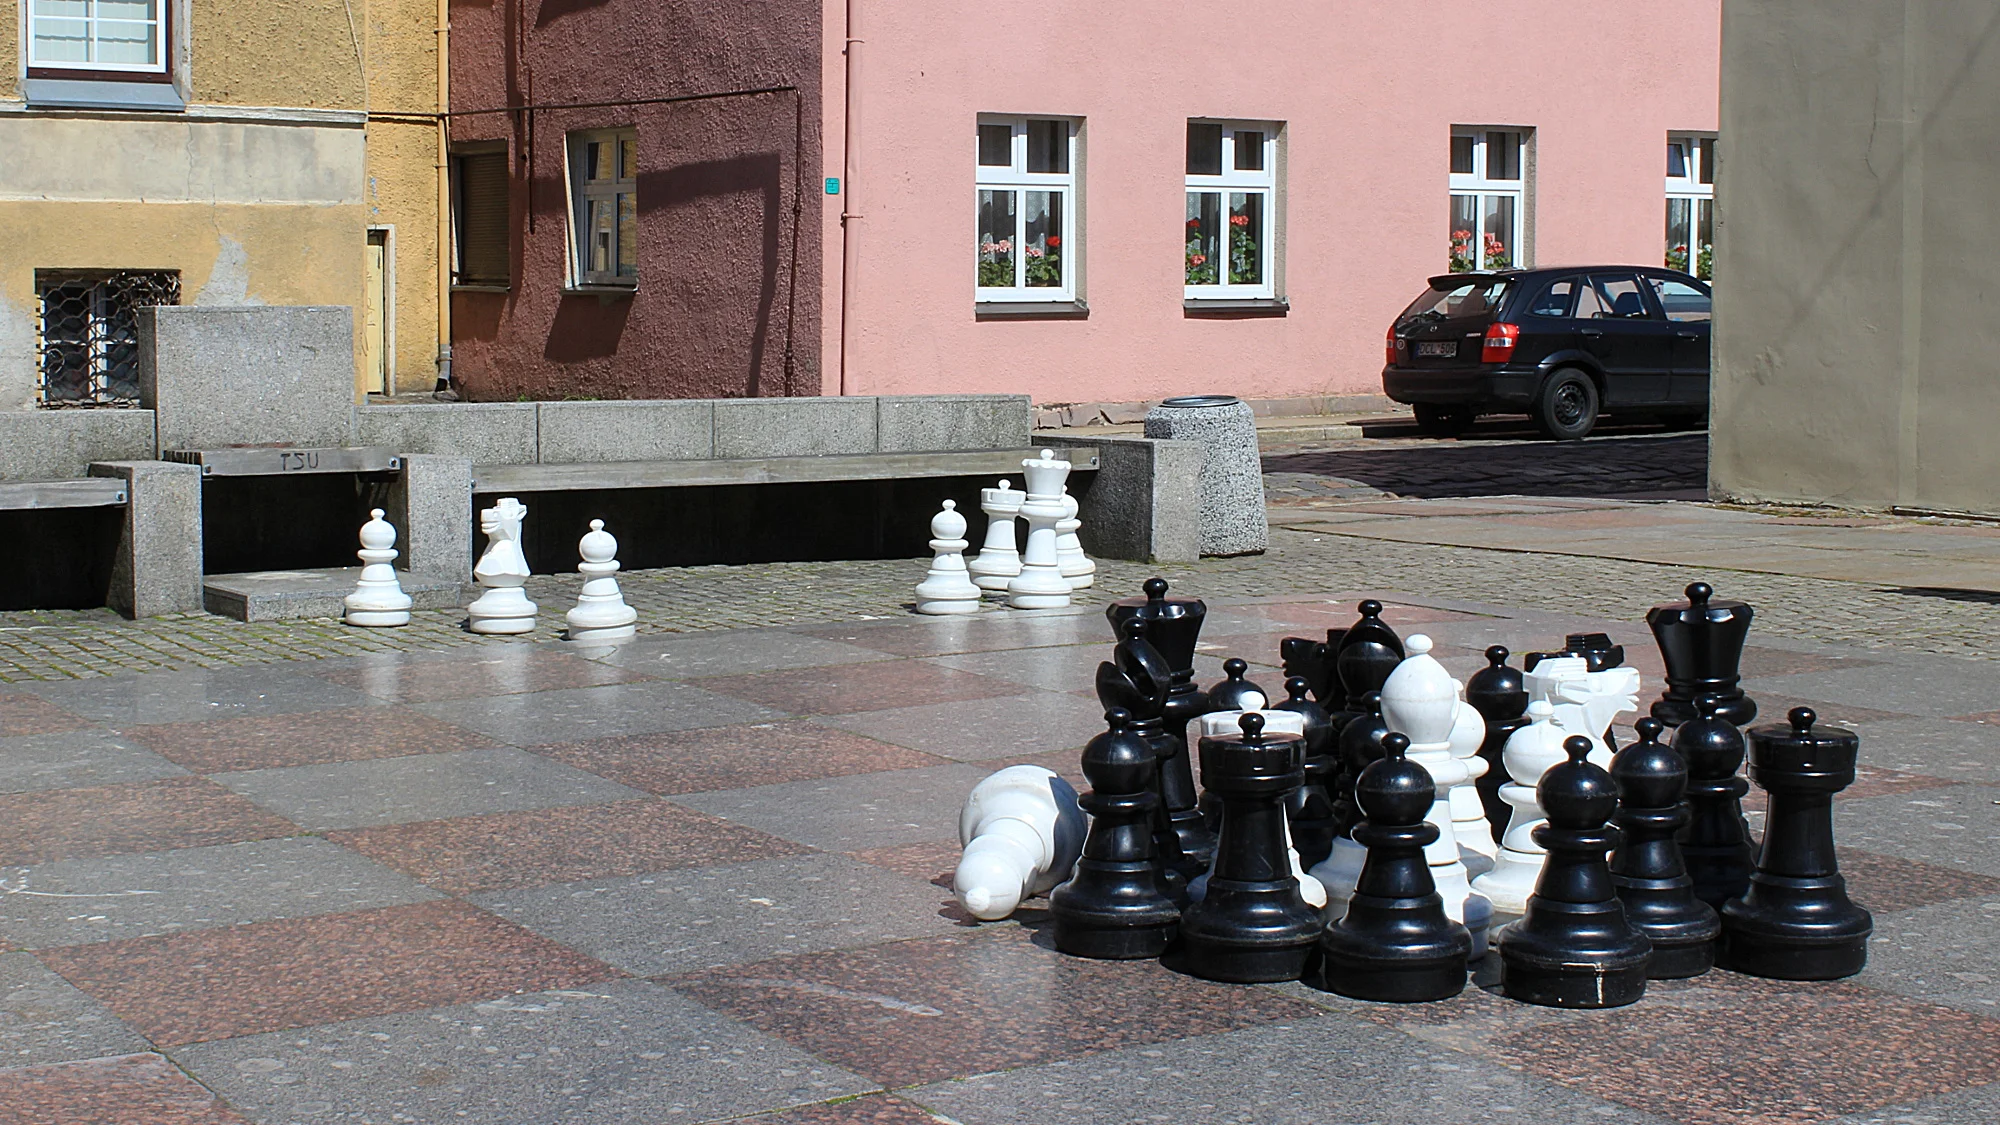 A giant public chessboard made of marble with most chess pieces collected in one cluster in Klaipeda.